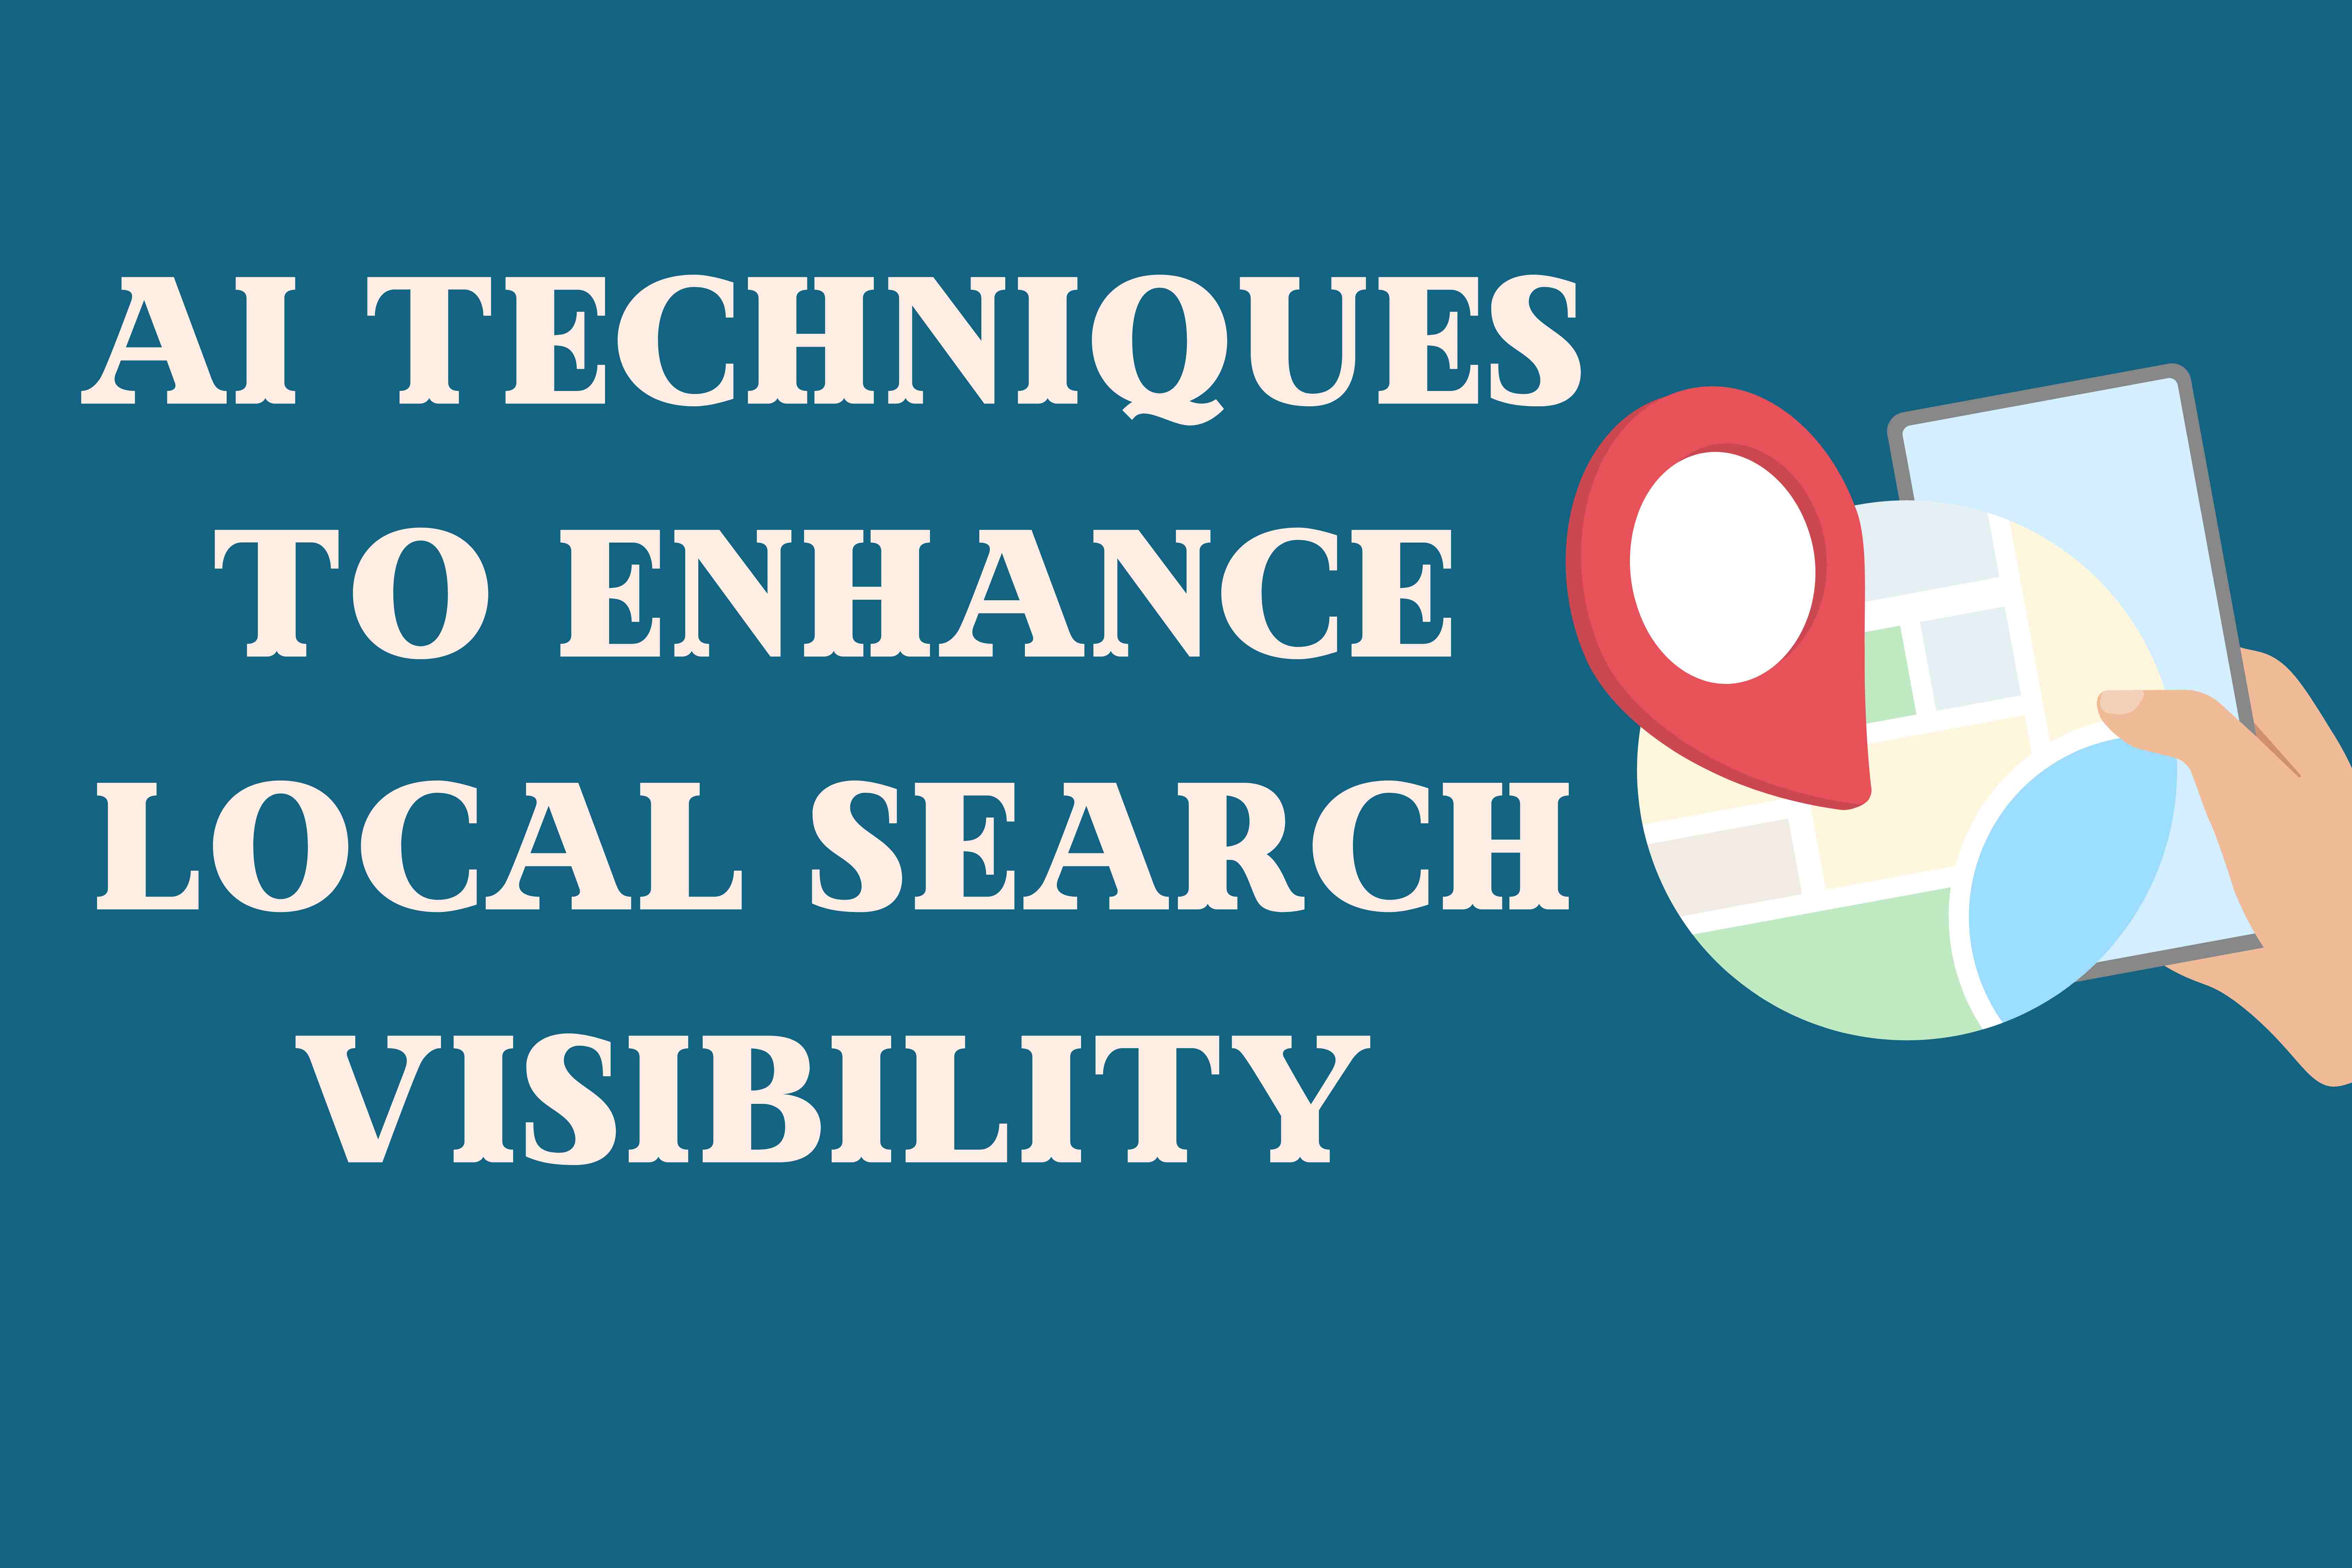 AI techniques TO enhance local search visibility